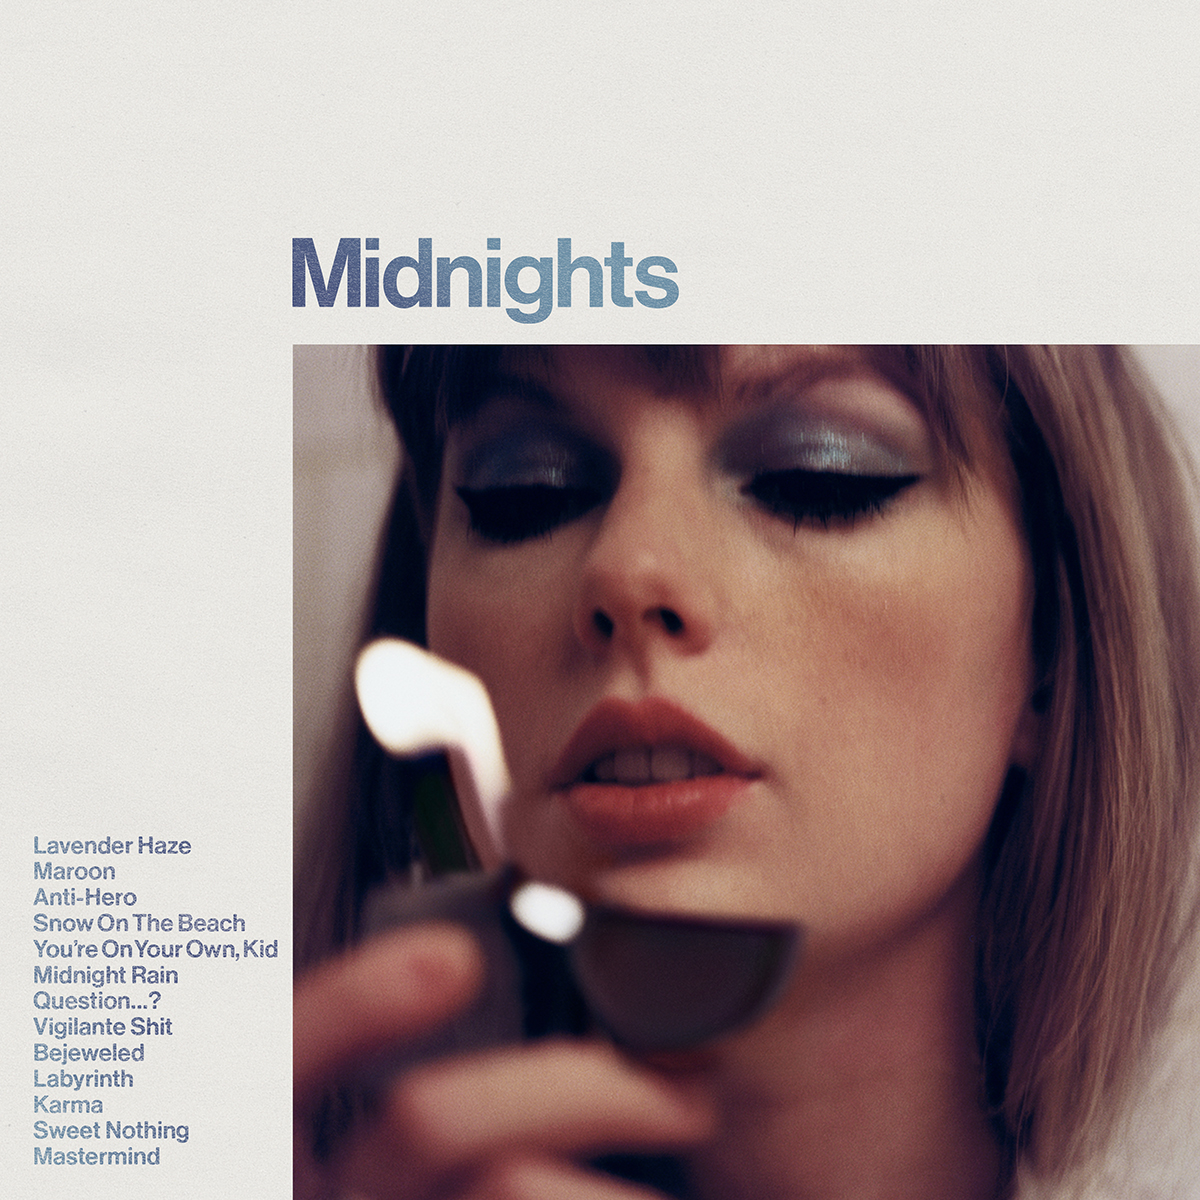 Midnights Album Cover Template